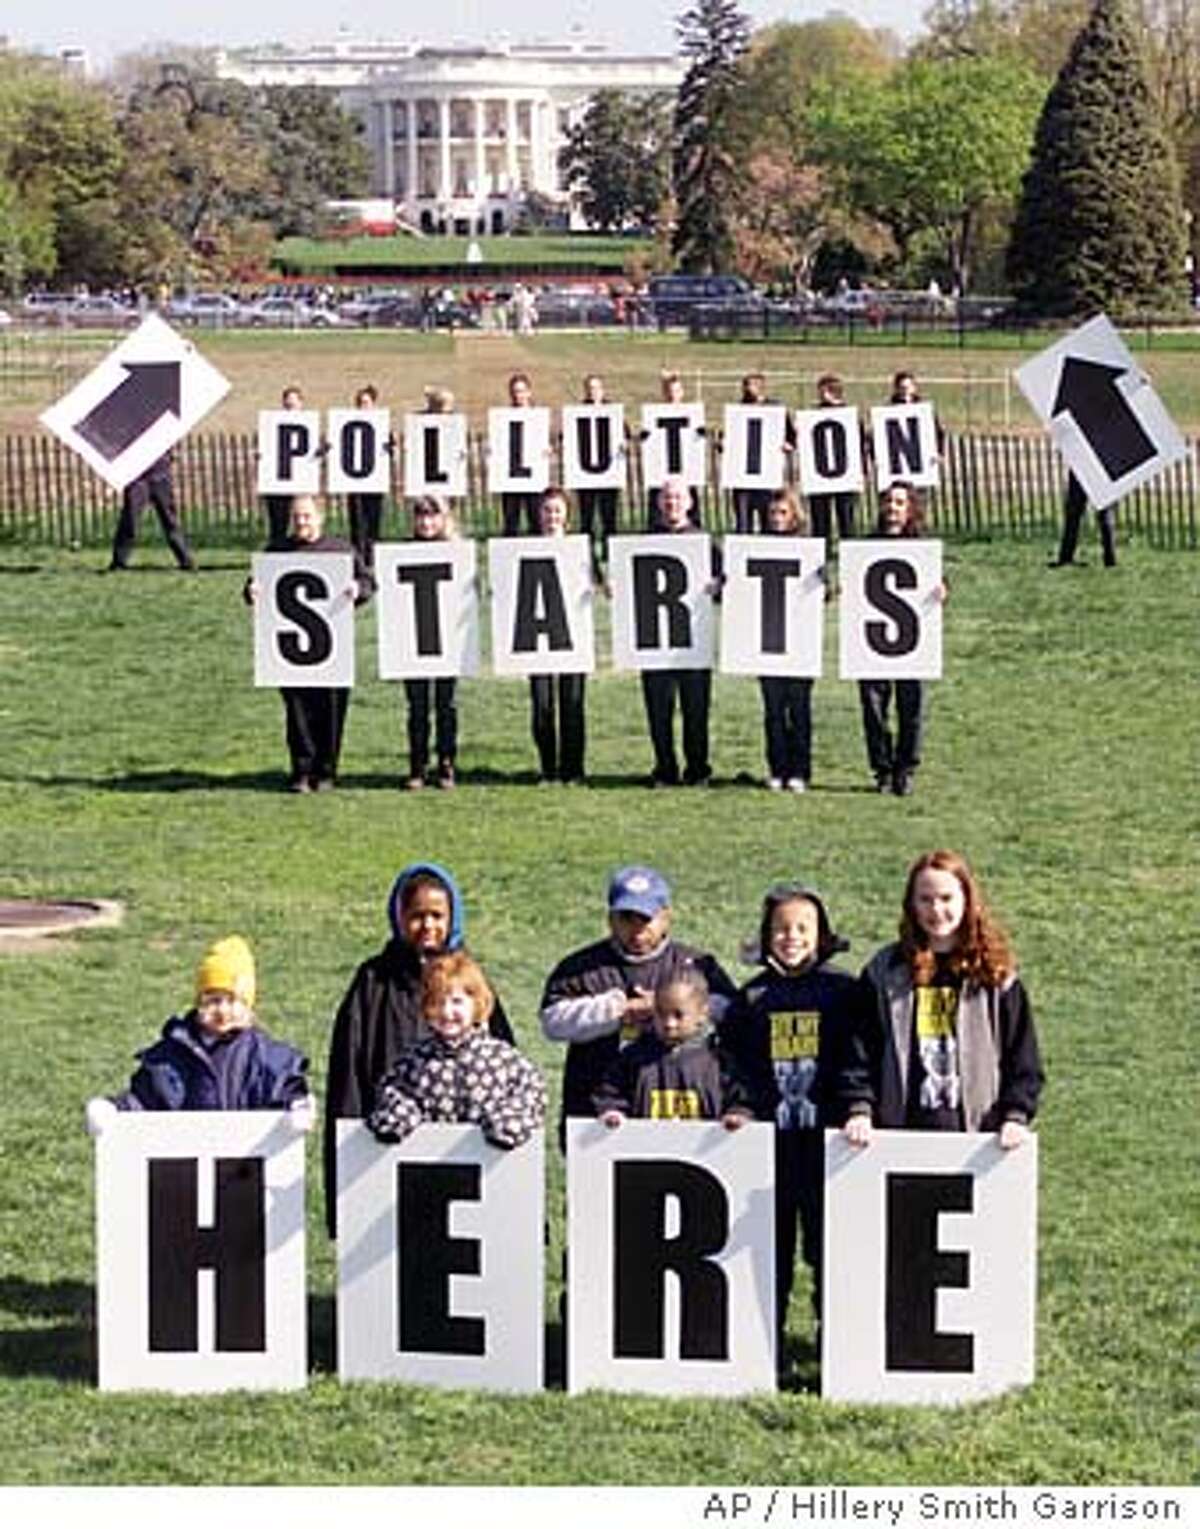 Demonstrators pose for a photo during a Greenpeace rally on the Ellipse in Washington Wednesday, April 18, 2001. Just in time for Eart Day on Sunday, President Bush issued good news to environmentalists. But as this protest shows, it will take far more than that to reassure conservation groups who say they've been steamrolled by a list of industry-friendly actions from the new administration. (AP Photo/ Hillery Smith Garrison) Ran on: 01-08-2006 Environmental activists once favored demonstrations like this Greenpeace rally at the White House, but now many play down grandstanding in favor of shaking hands with enlightened executives.